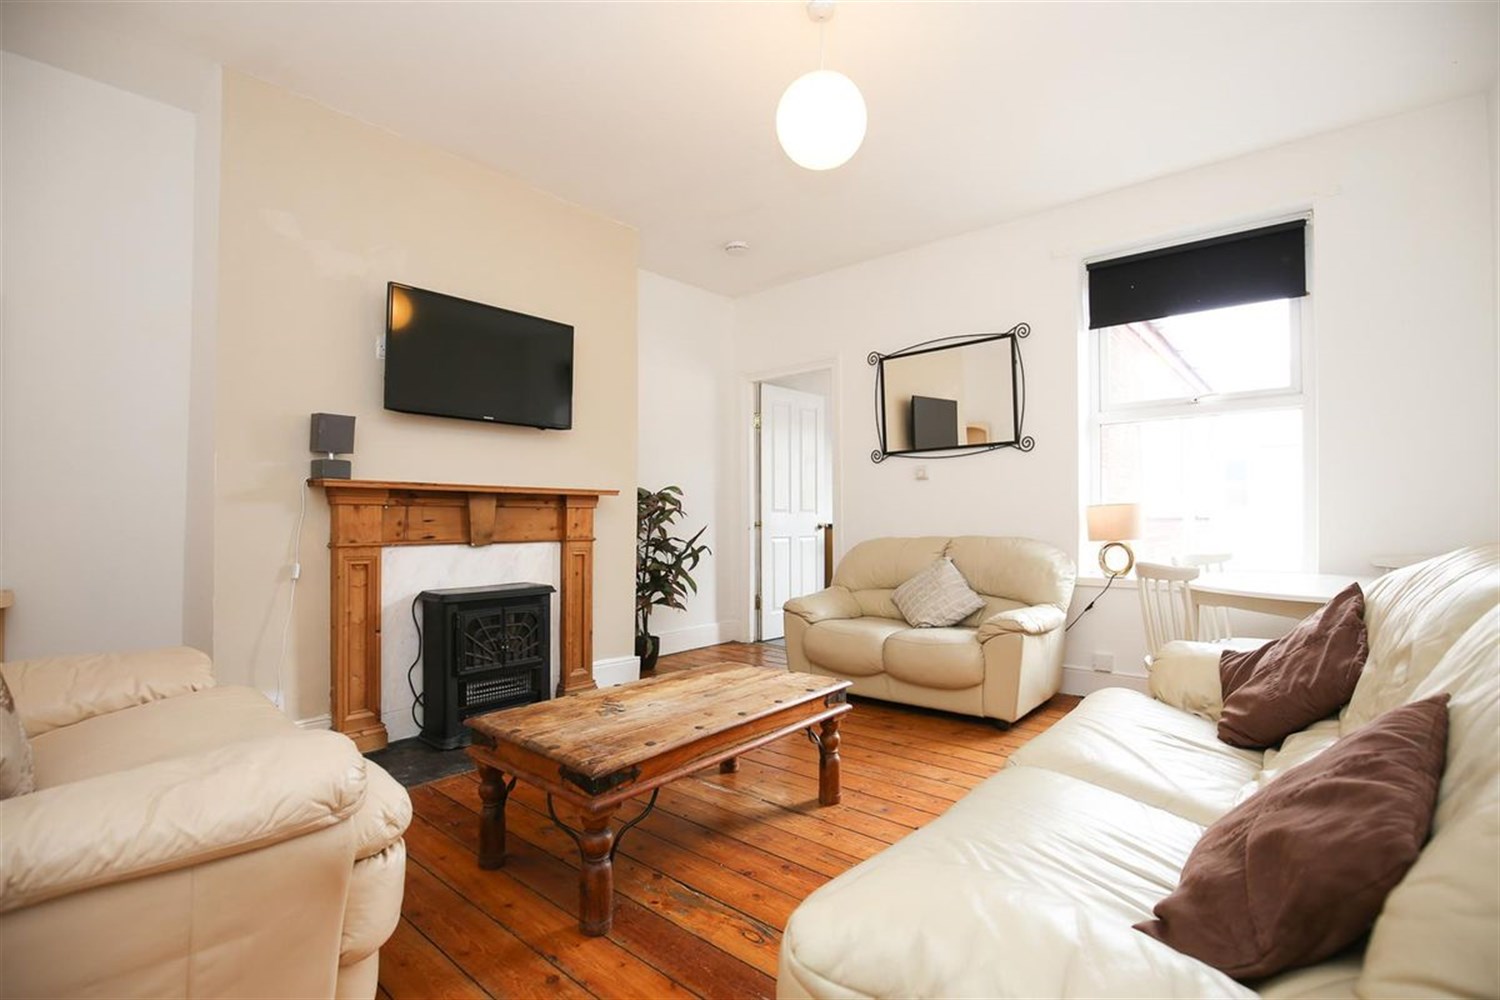 3 bed Flat for rent in Newcastle Upon Tyne. From pro-lets.co.uk